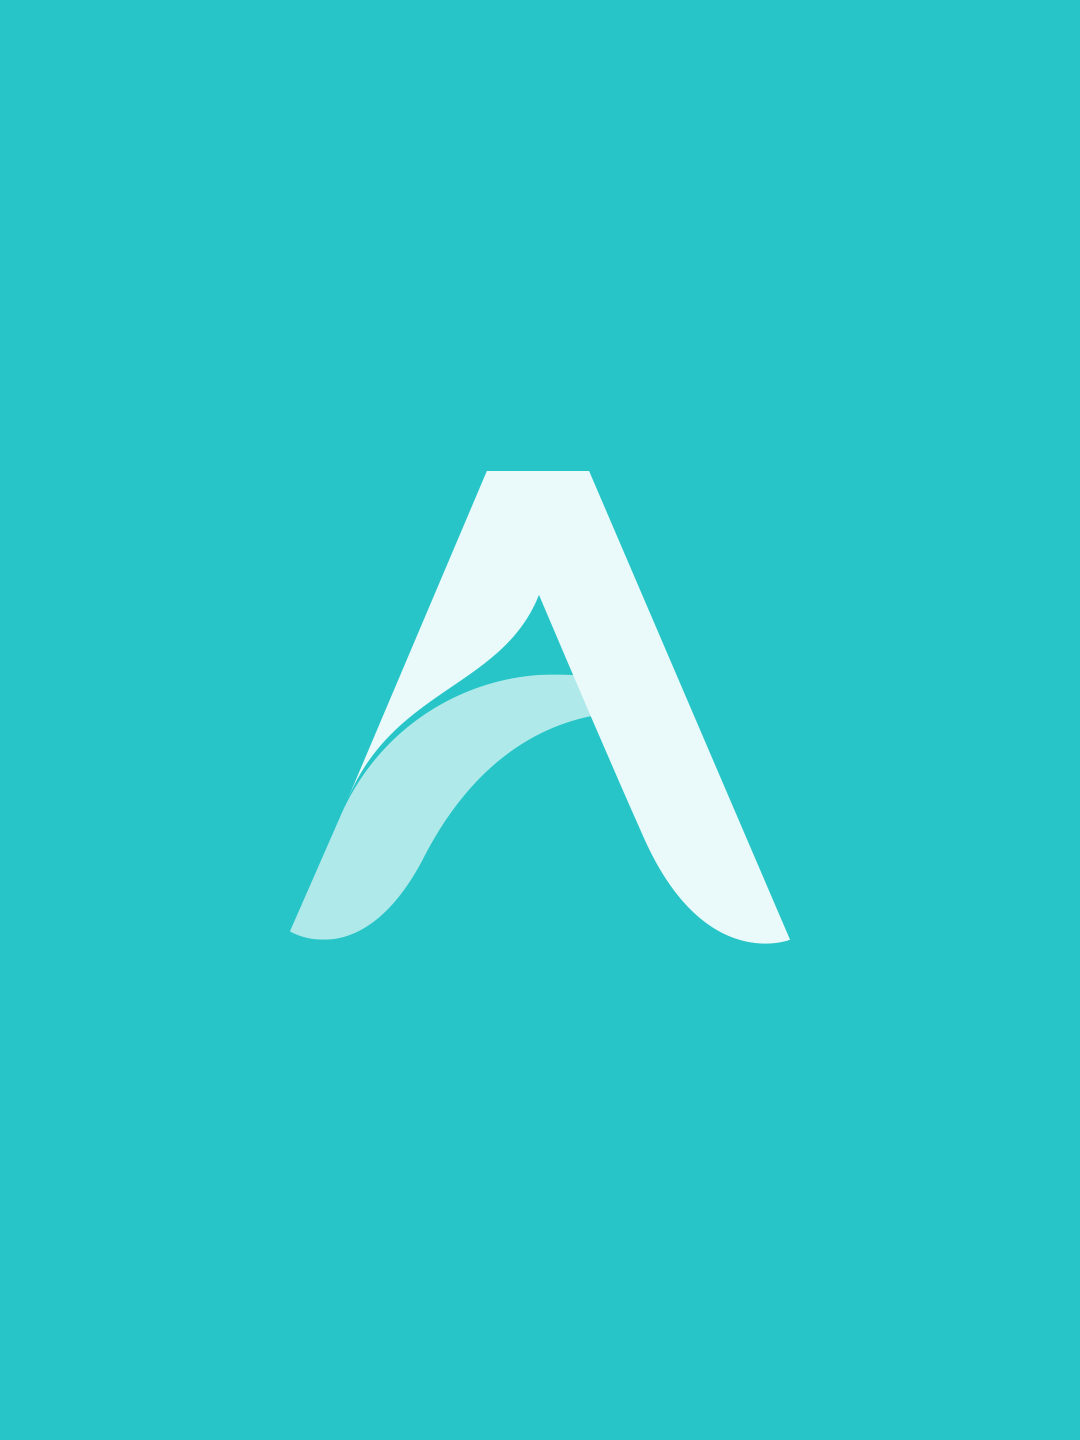 Final brand identity design for Able Education shown on a solid teal background.